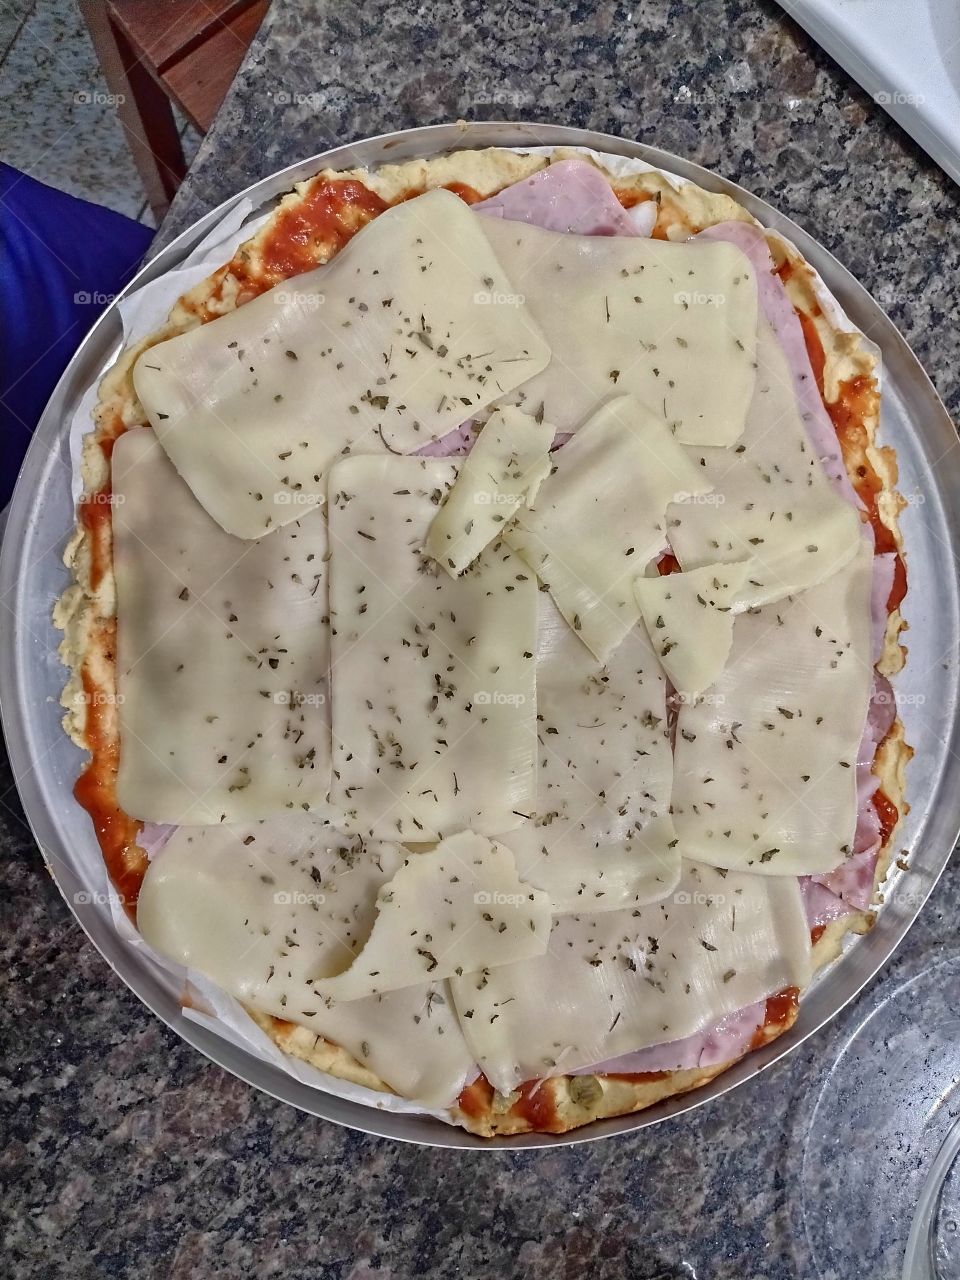 PIZZA LOWCARB